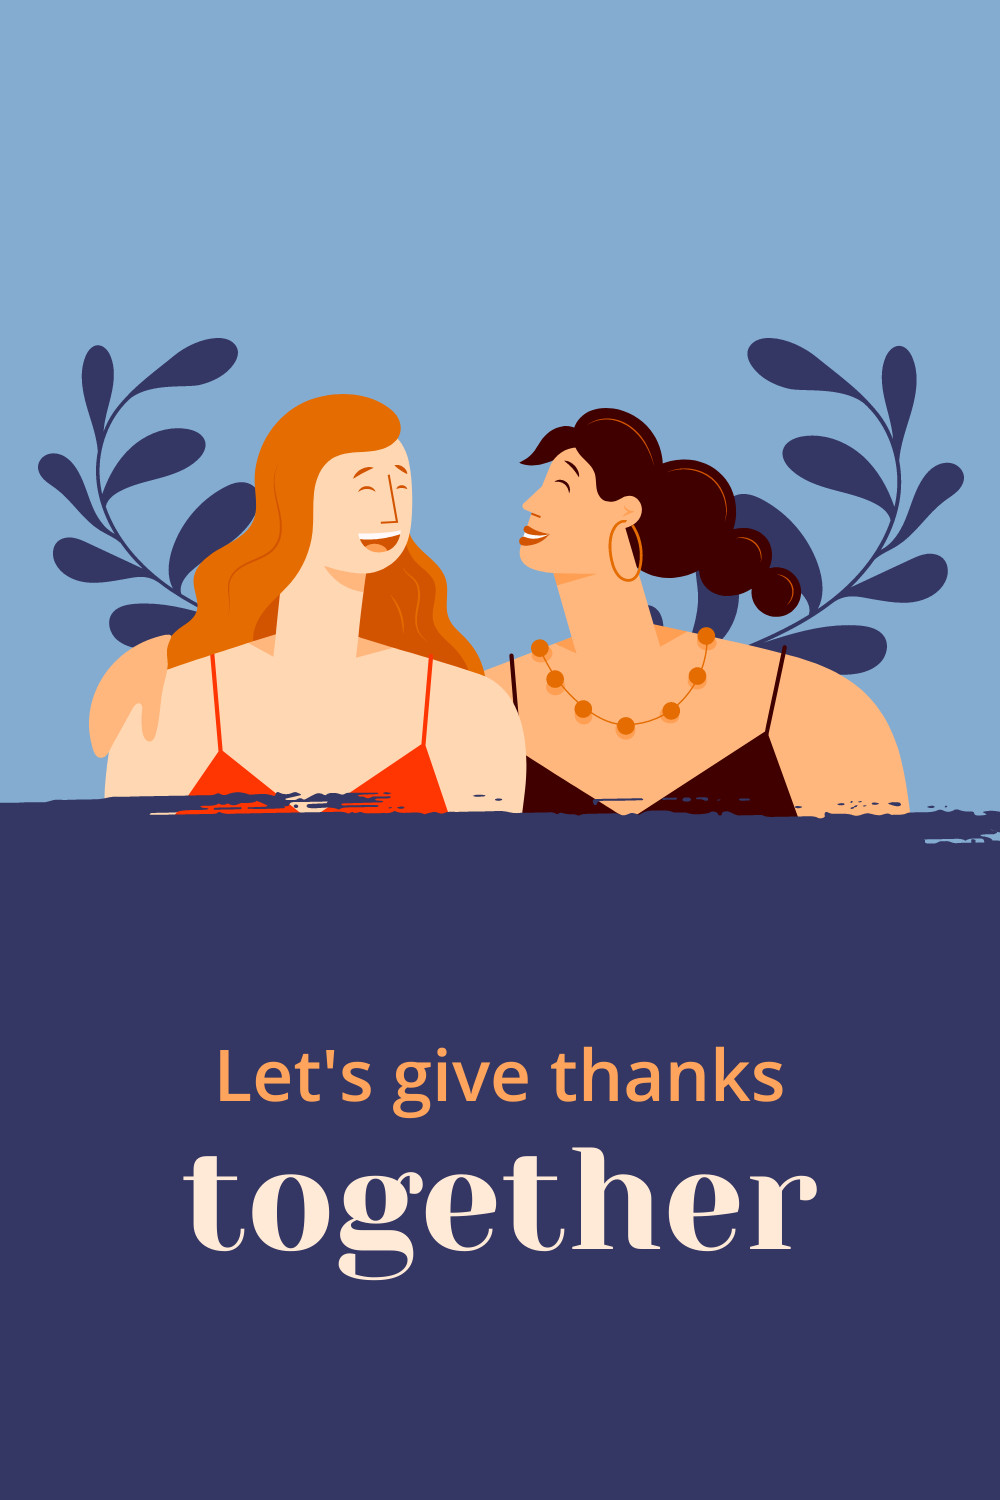 Let's Give Thanks Together Girls Facebook Cover 820x360